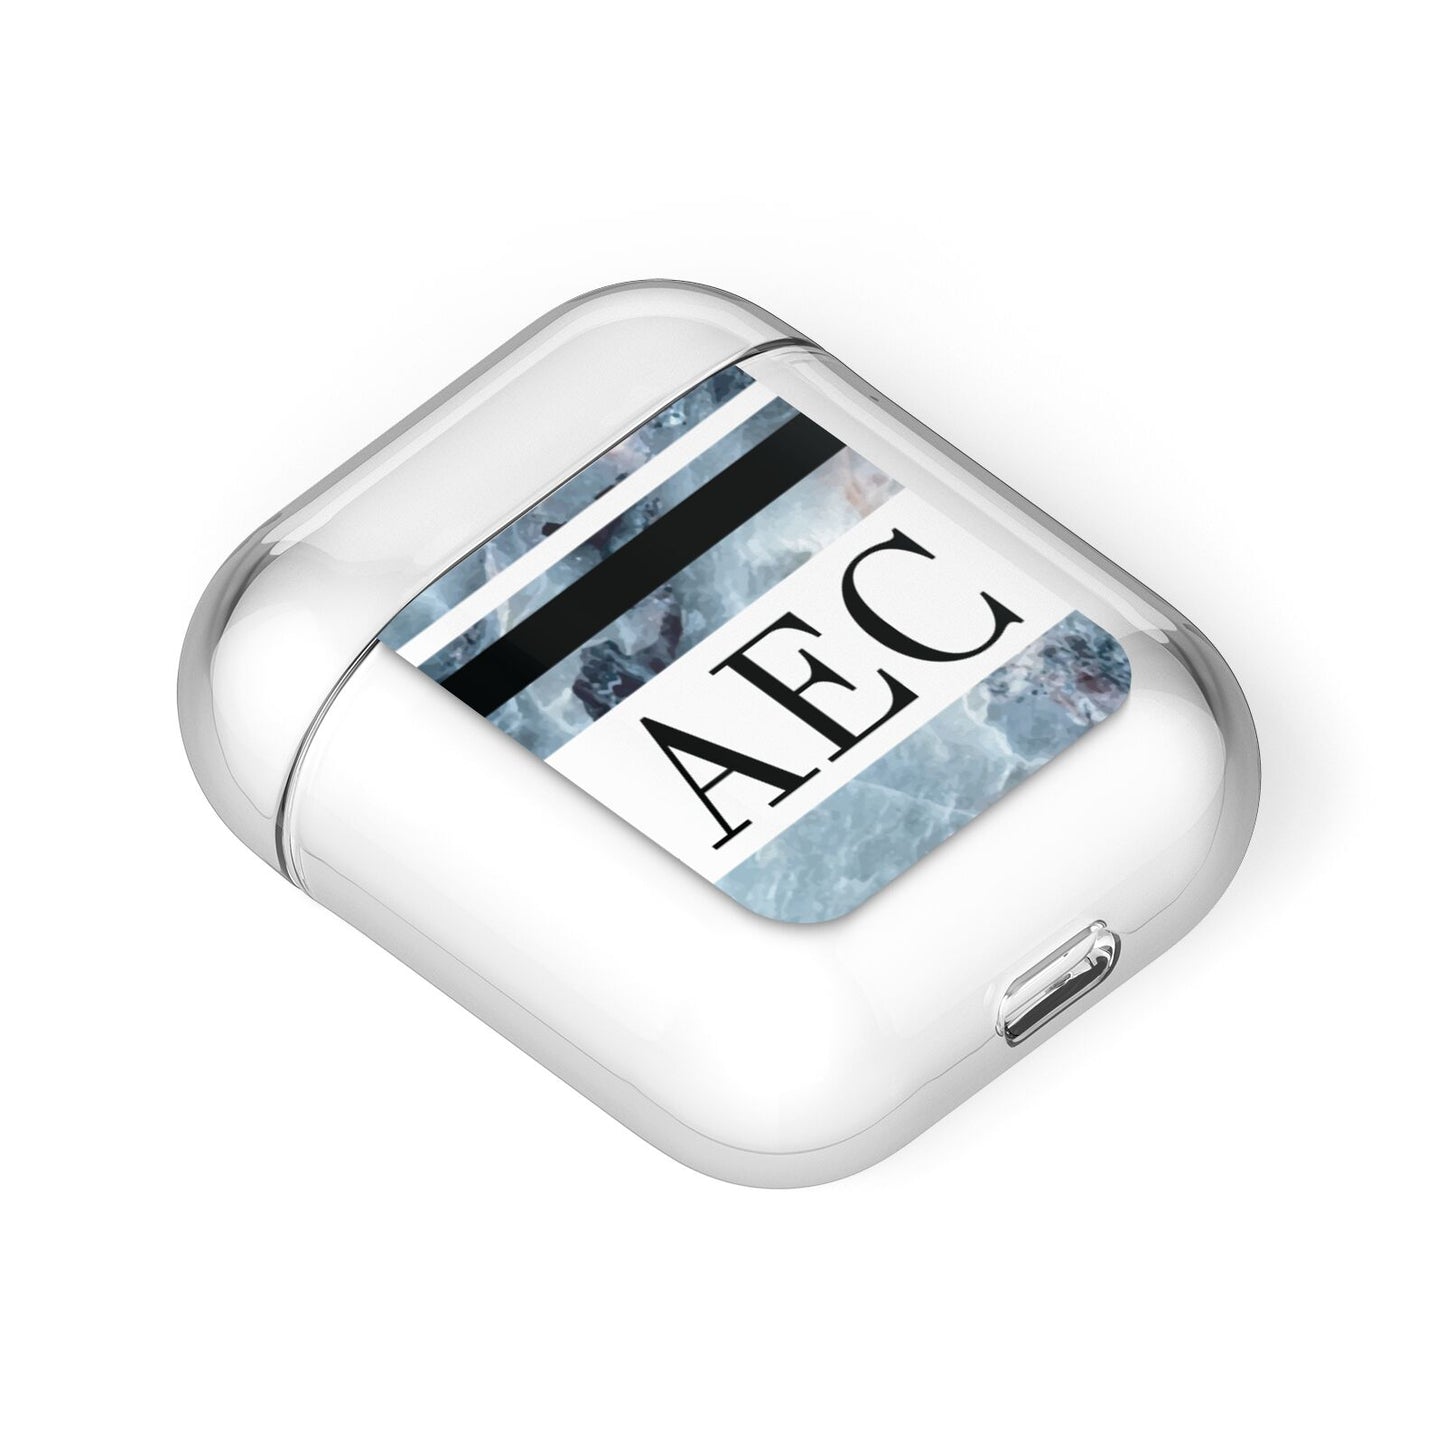 Personalised Initials Marble 9 AirPods Case Laid Flat